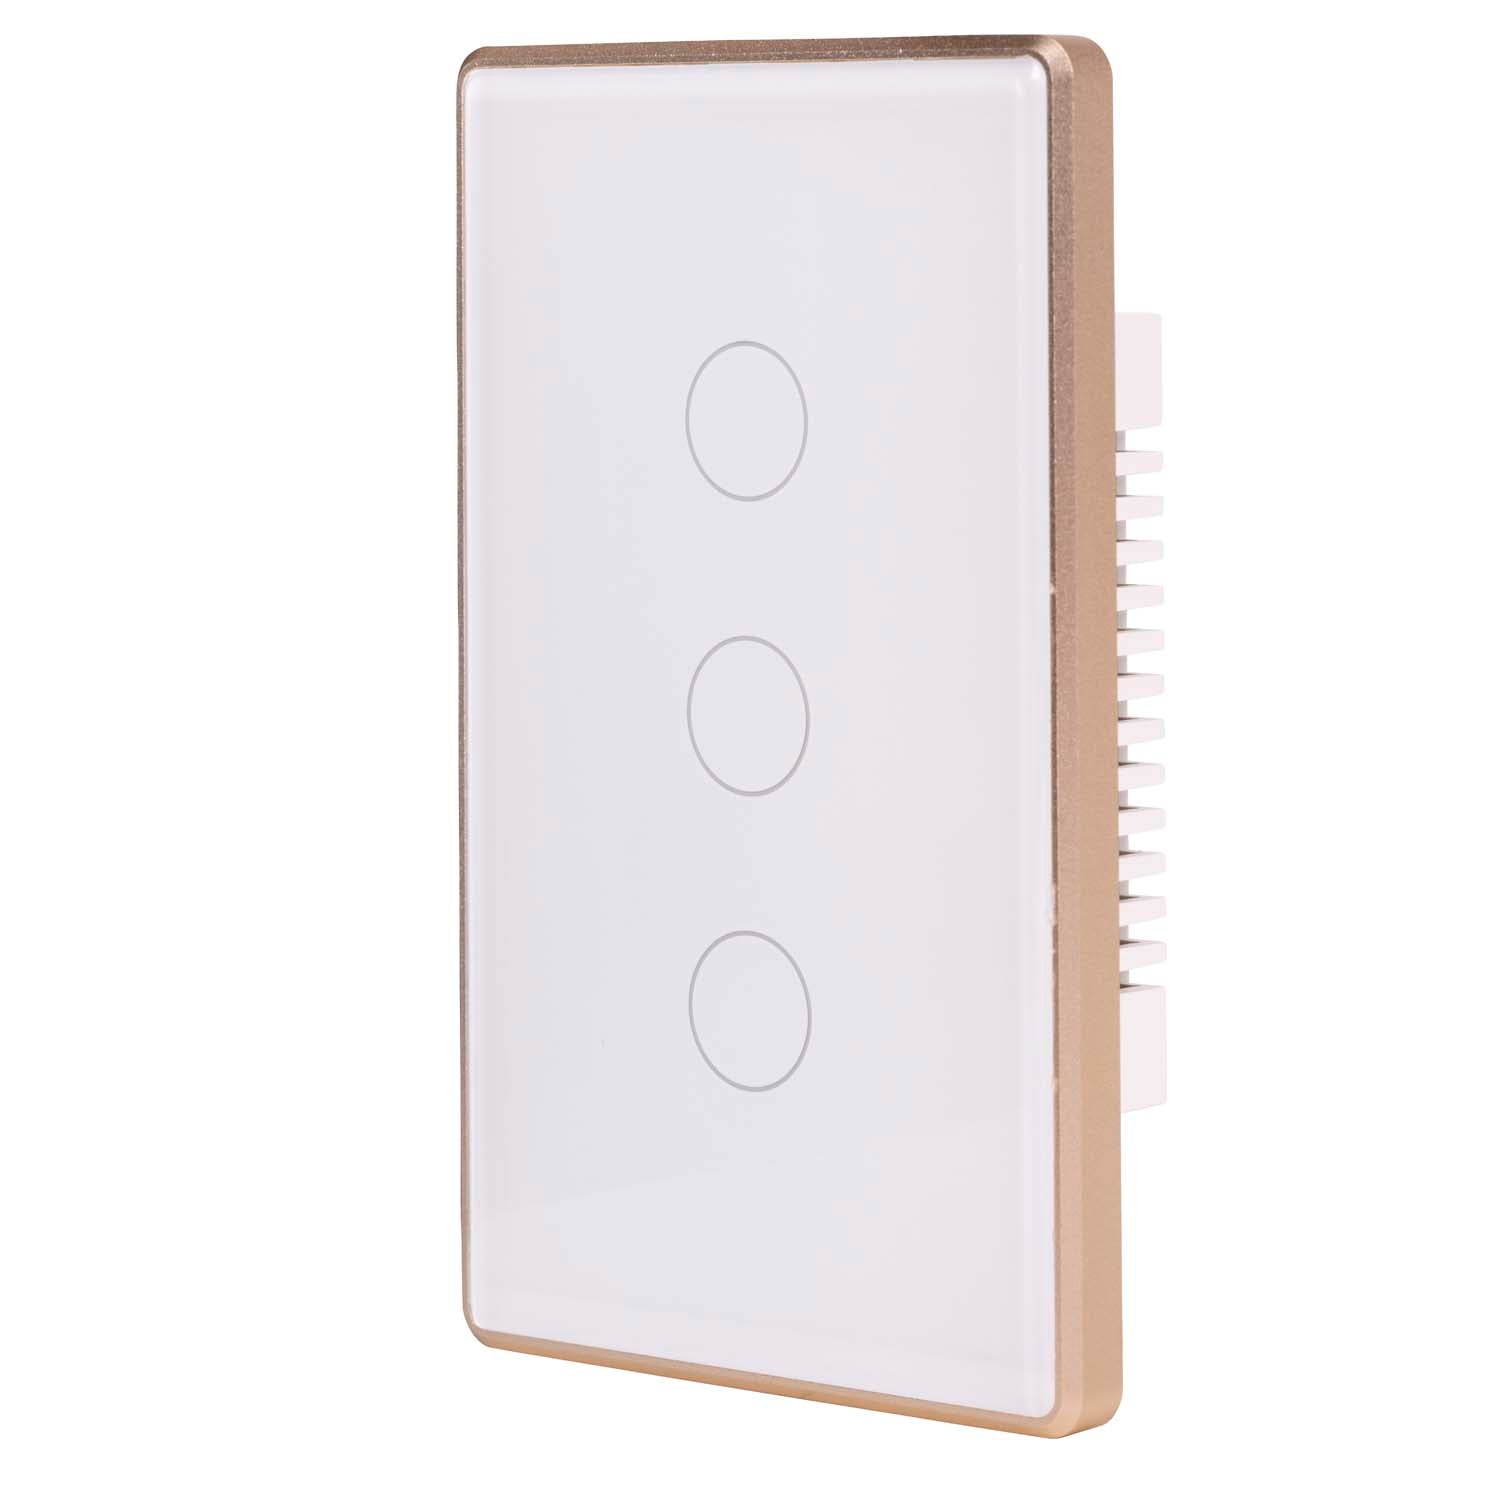 HV9120-3 - Wifi 3 Gang White with Gold Trim Wall Switch